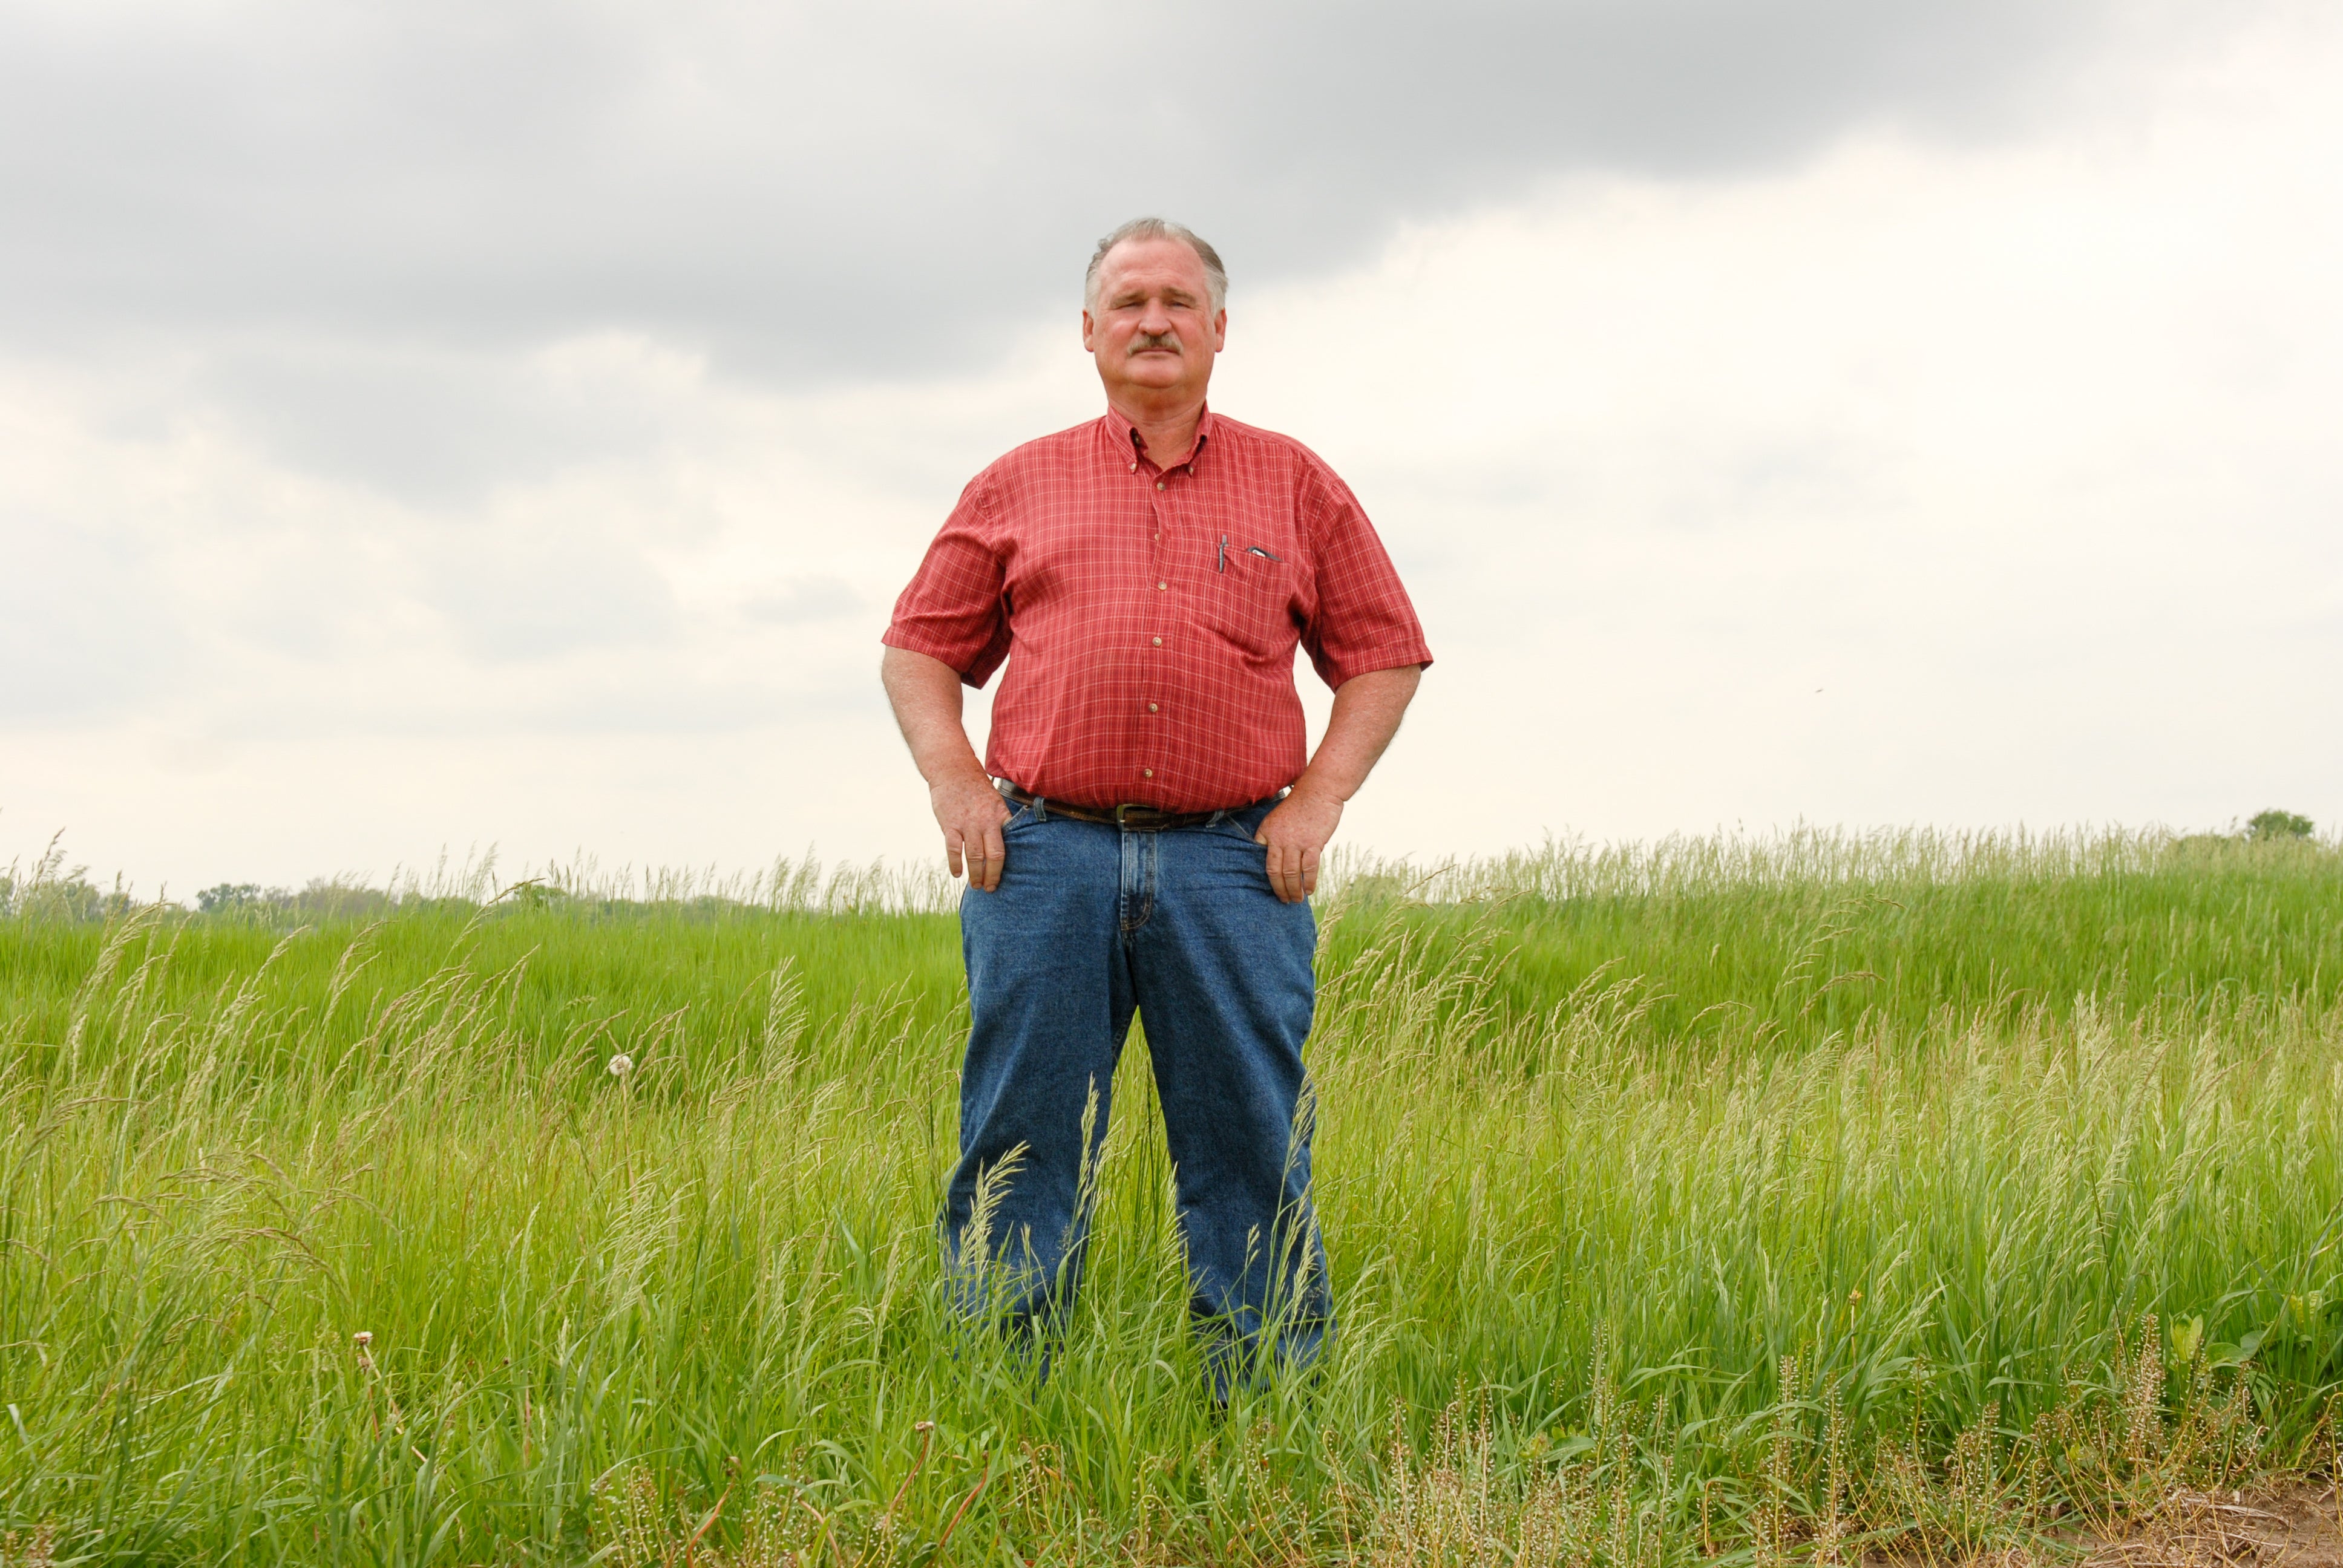 An Ohio farmer and climate advocate stares straight ahead